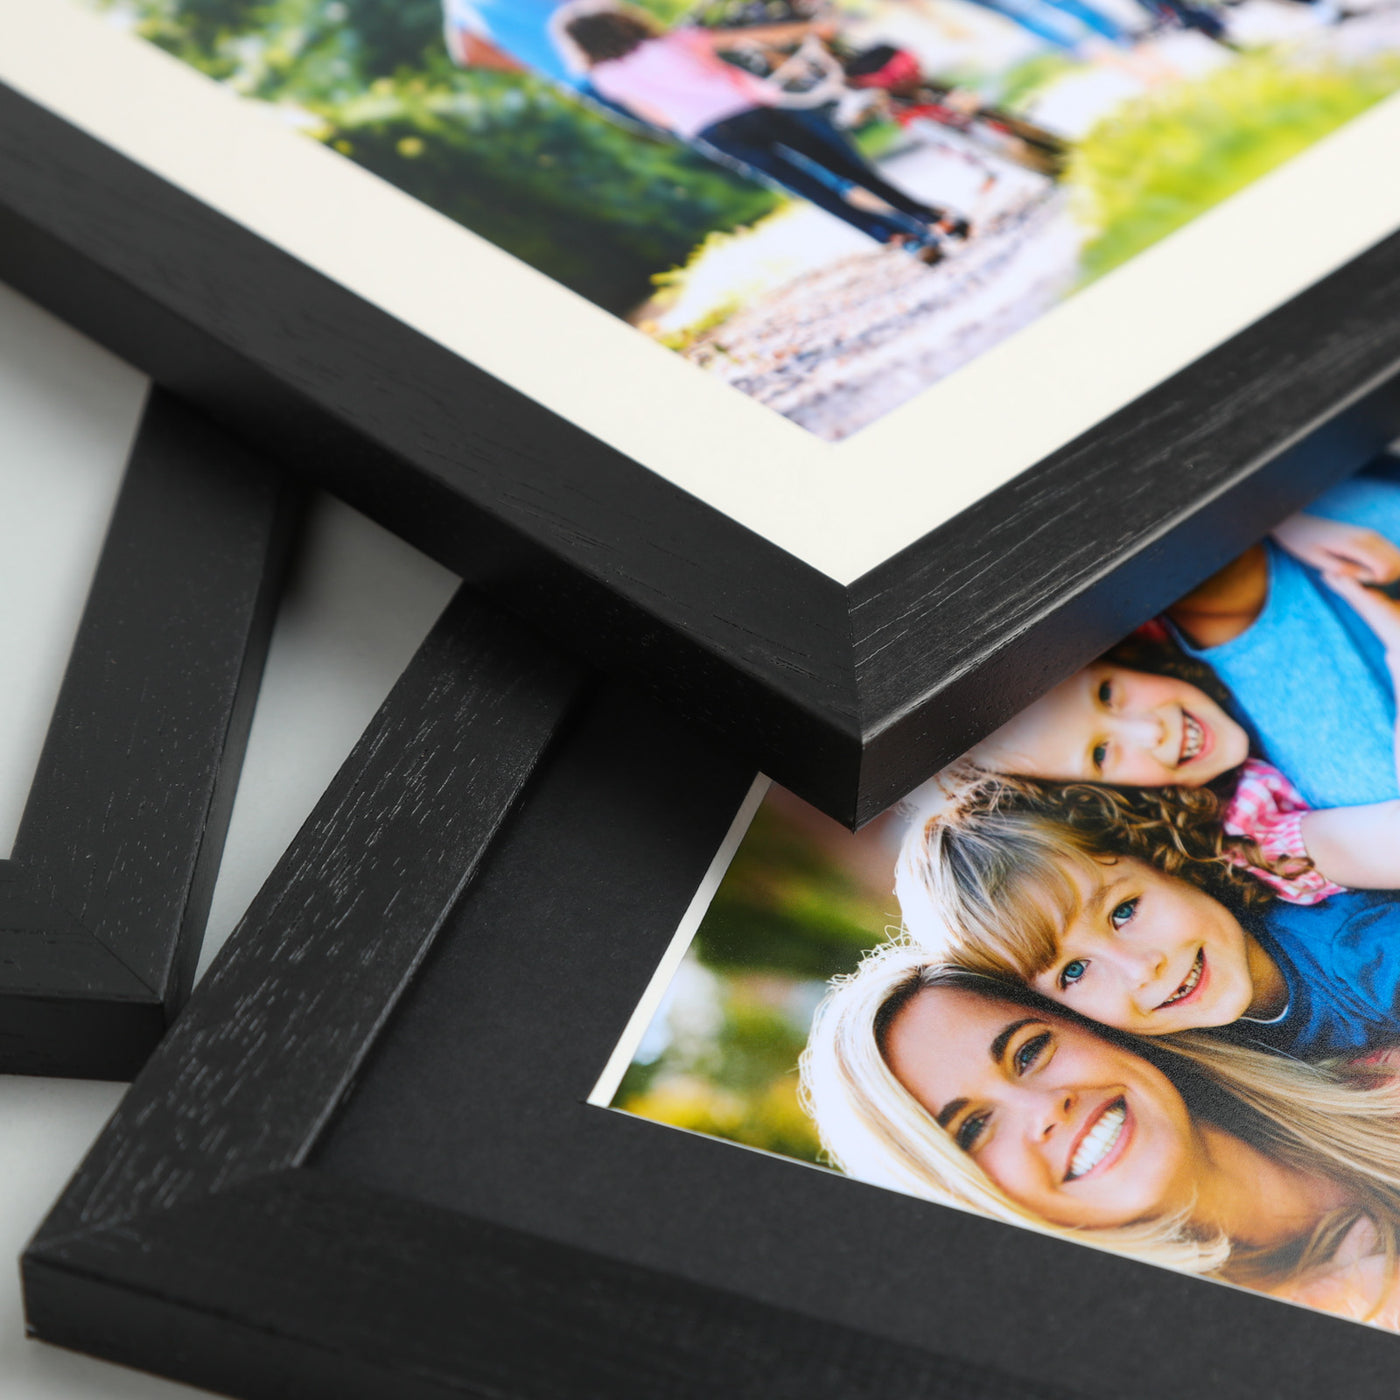 20x16 Classic Black Picture Frame with a 16x12 Mount